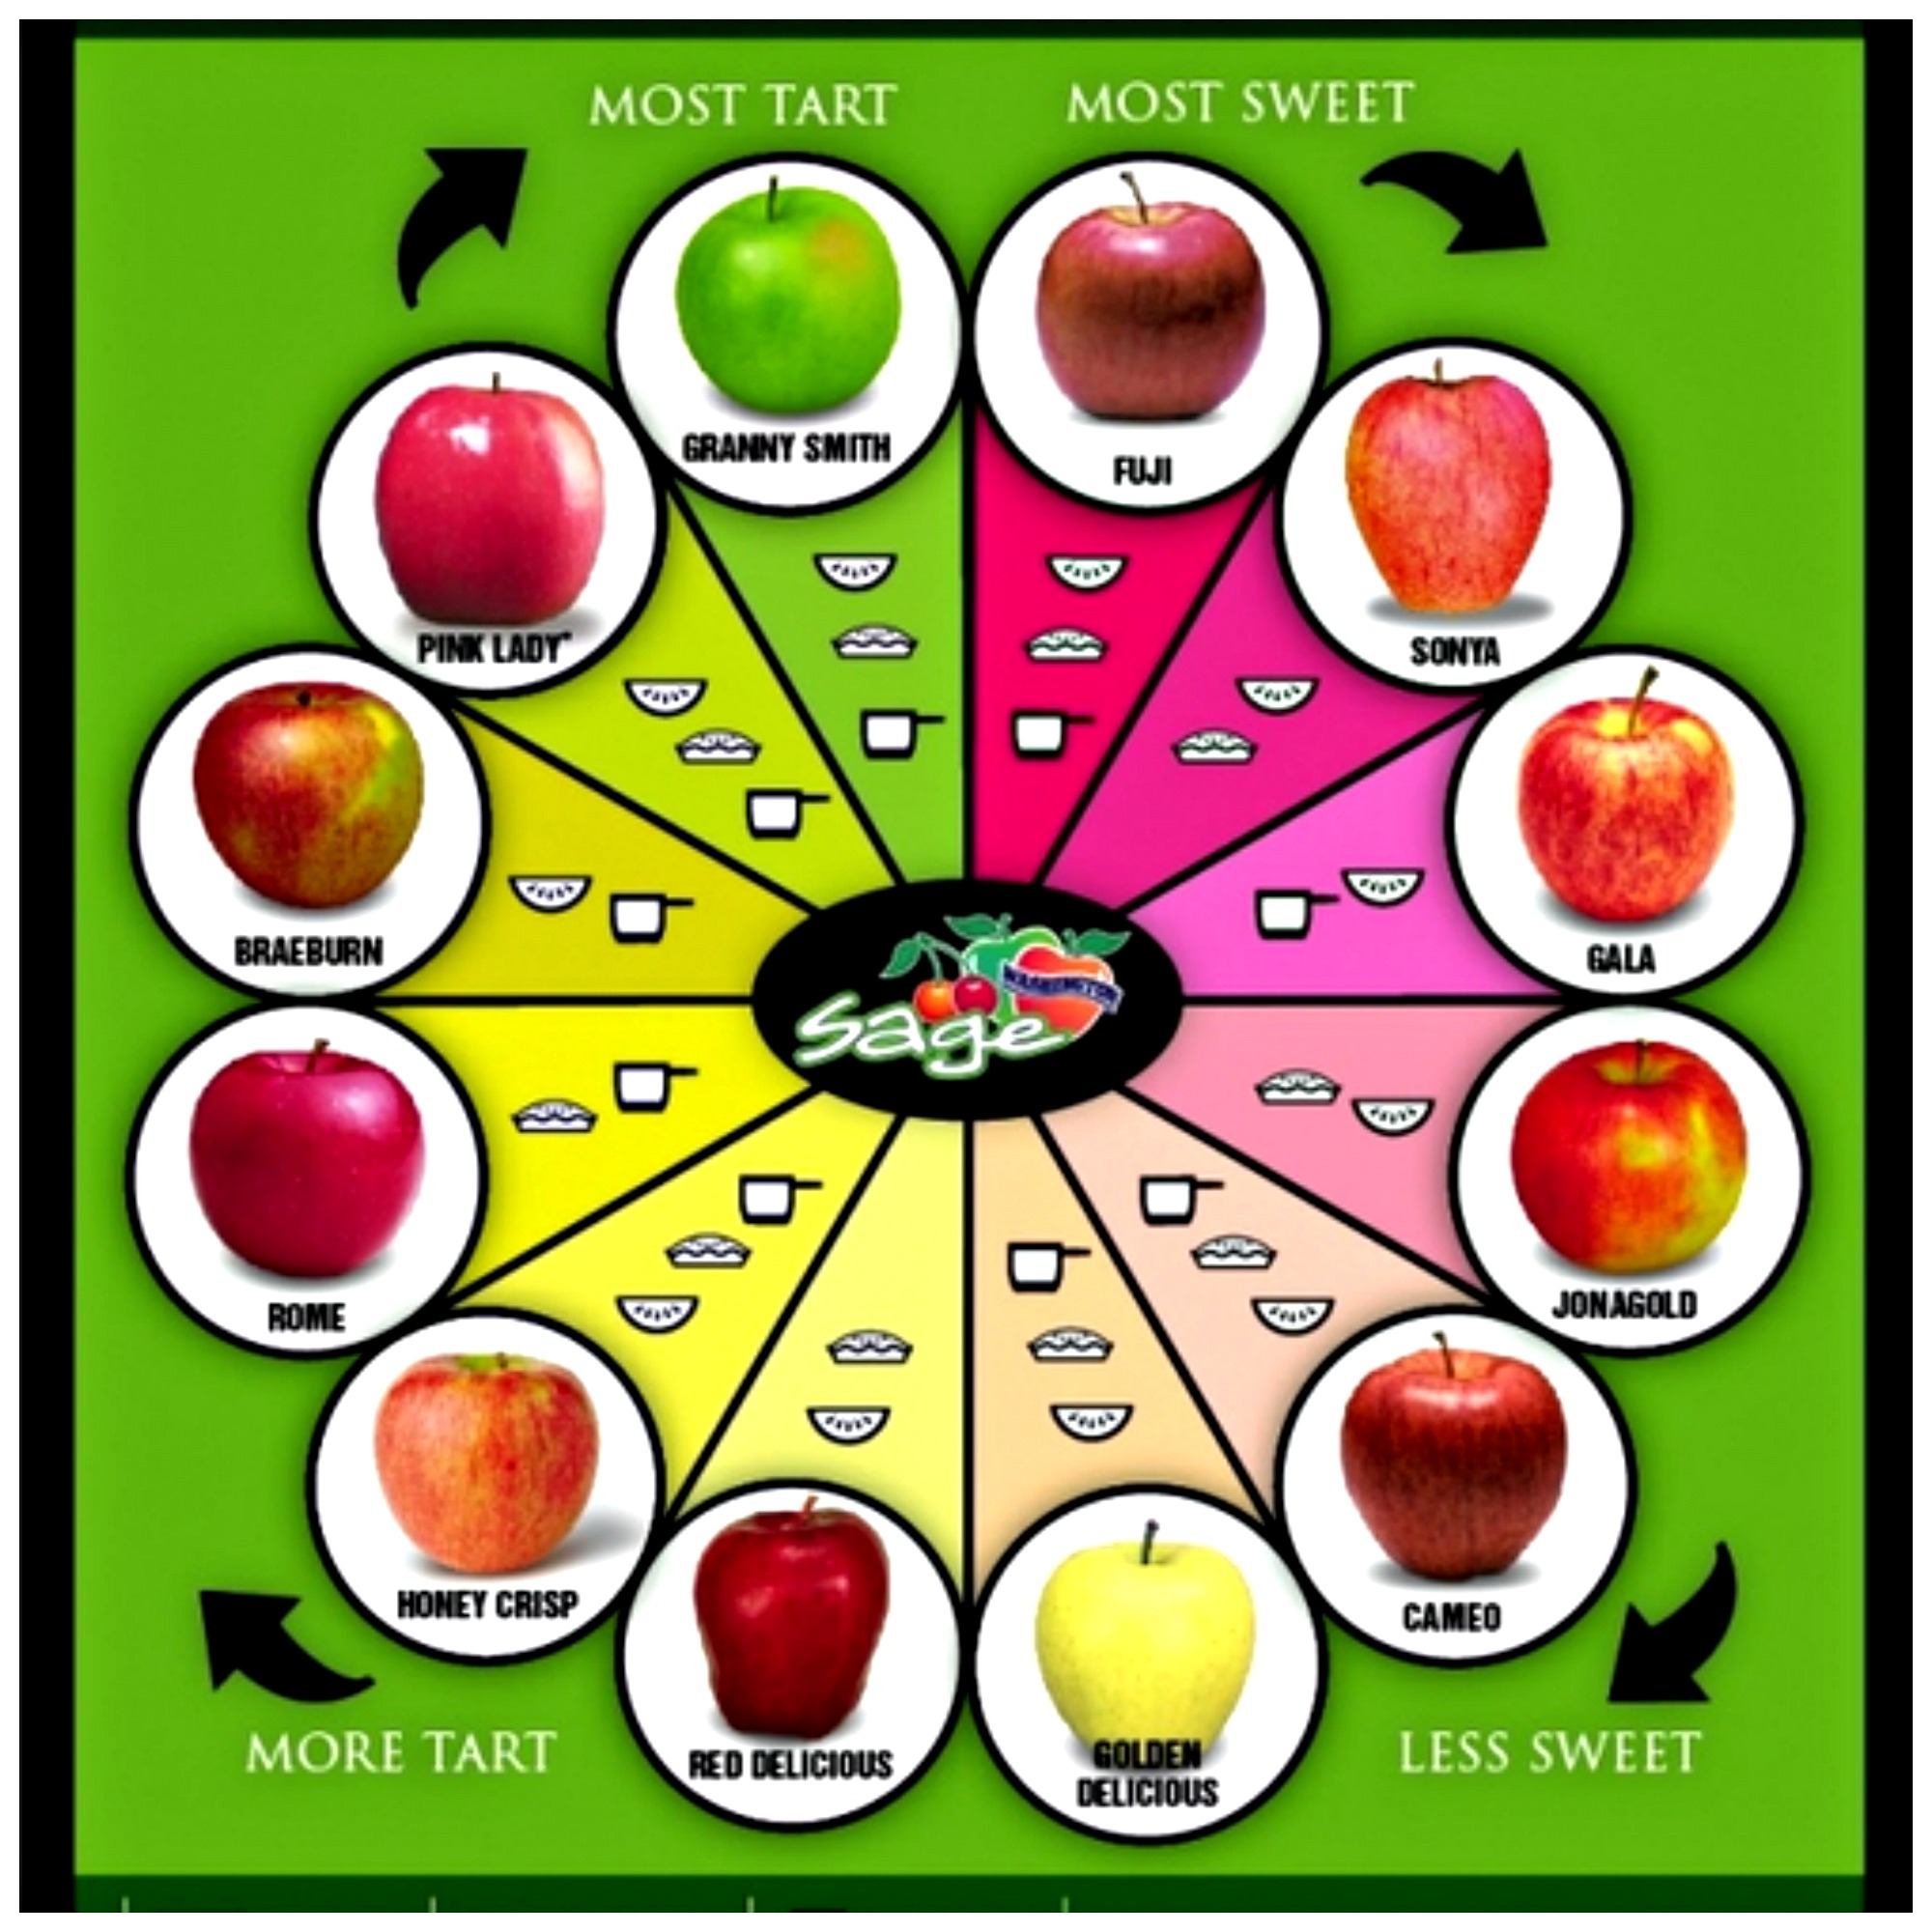 health-benefits-of-apples-and-why-apples-are-a-great-food-for-kids